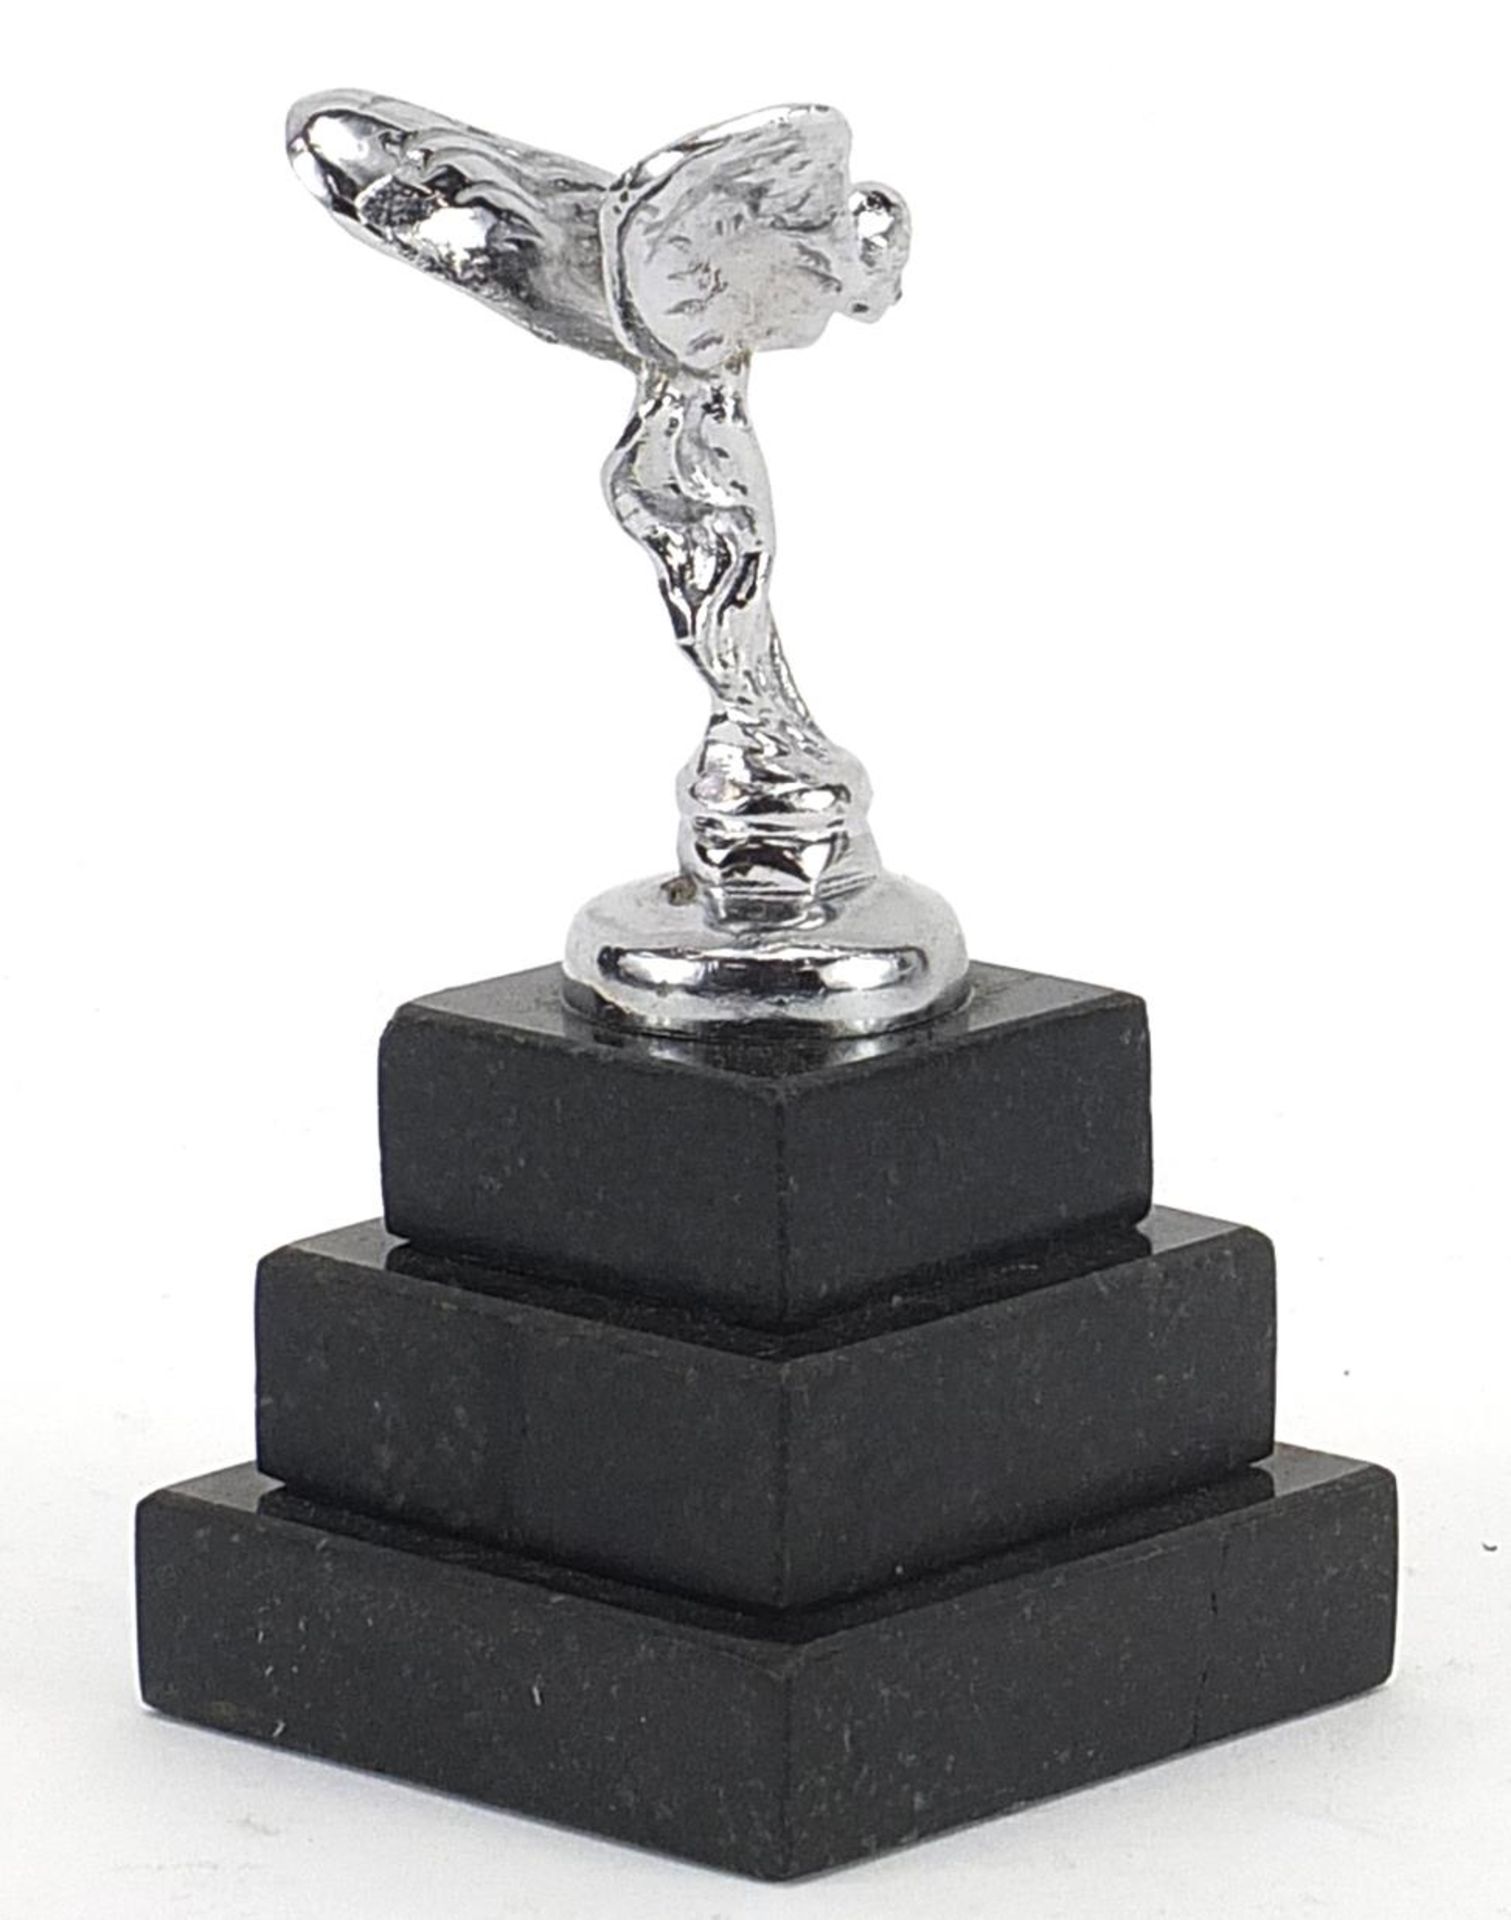 Chromed Rolls Royce Spirit of Ecstasy car mascot style paperweight raised on a square stepped marble - Image 2 of 3